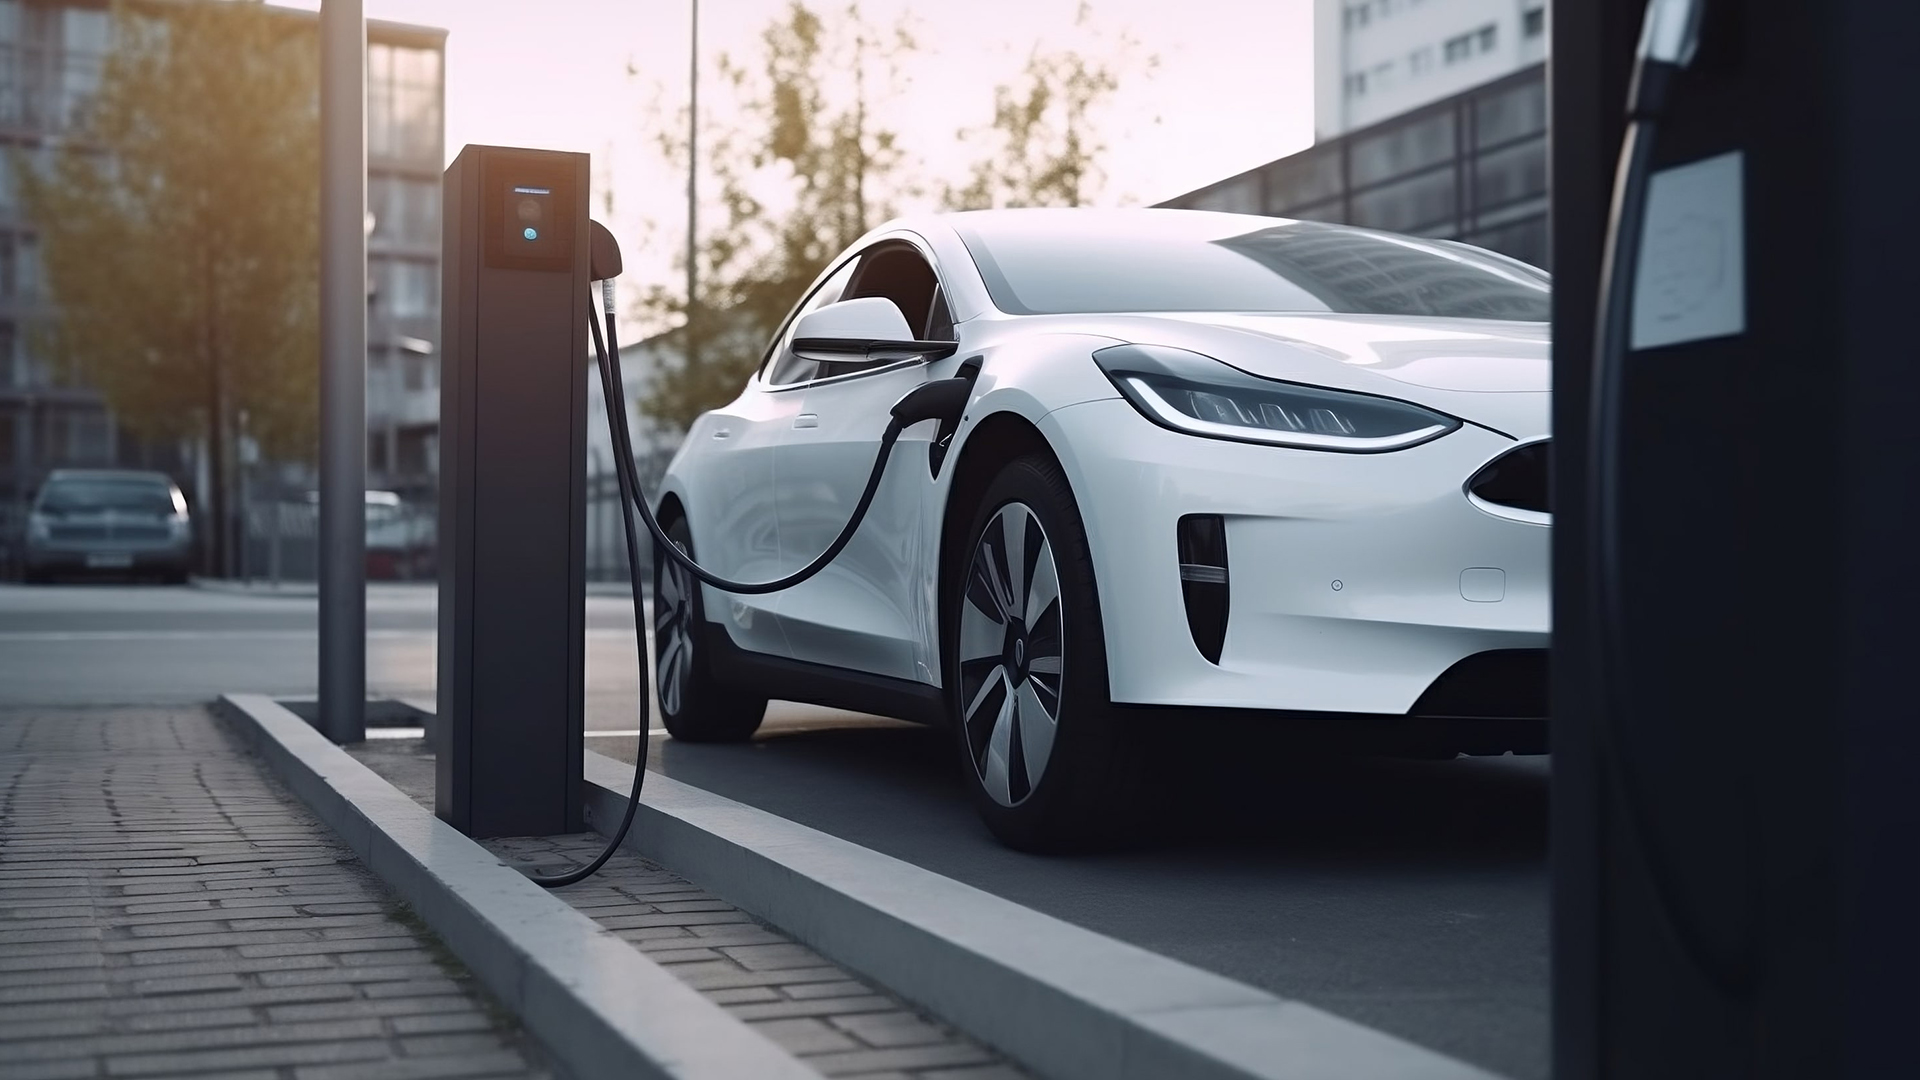 EV charging stations will be located every 60km under new EU rules